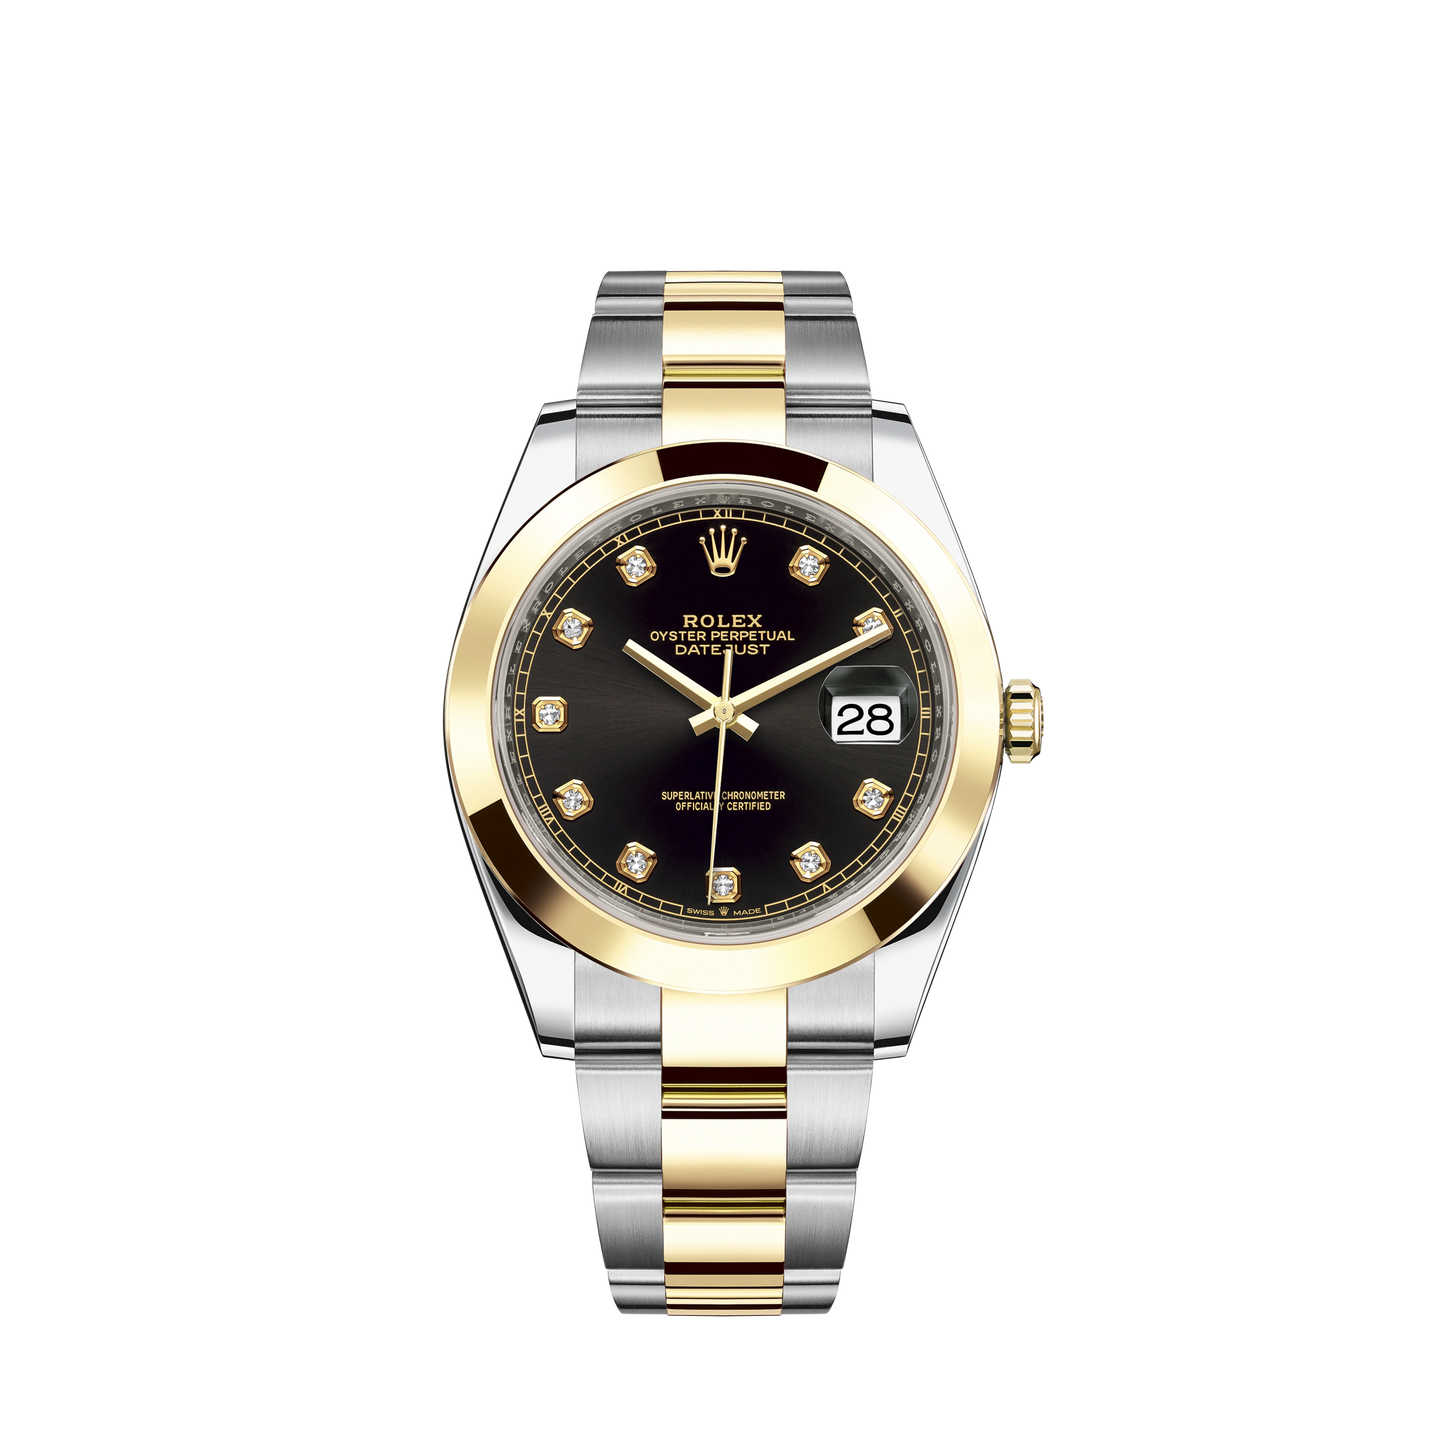 Datejust 41 41mm Oyster Bracelet Oystersteel and Yellow Gold with Bright Black Diamond-Set Dial Yellow Gold Bezel